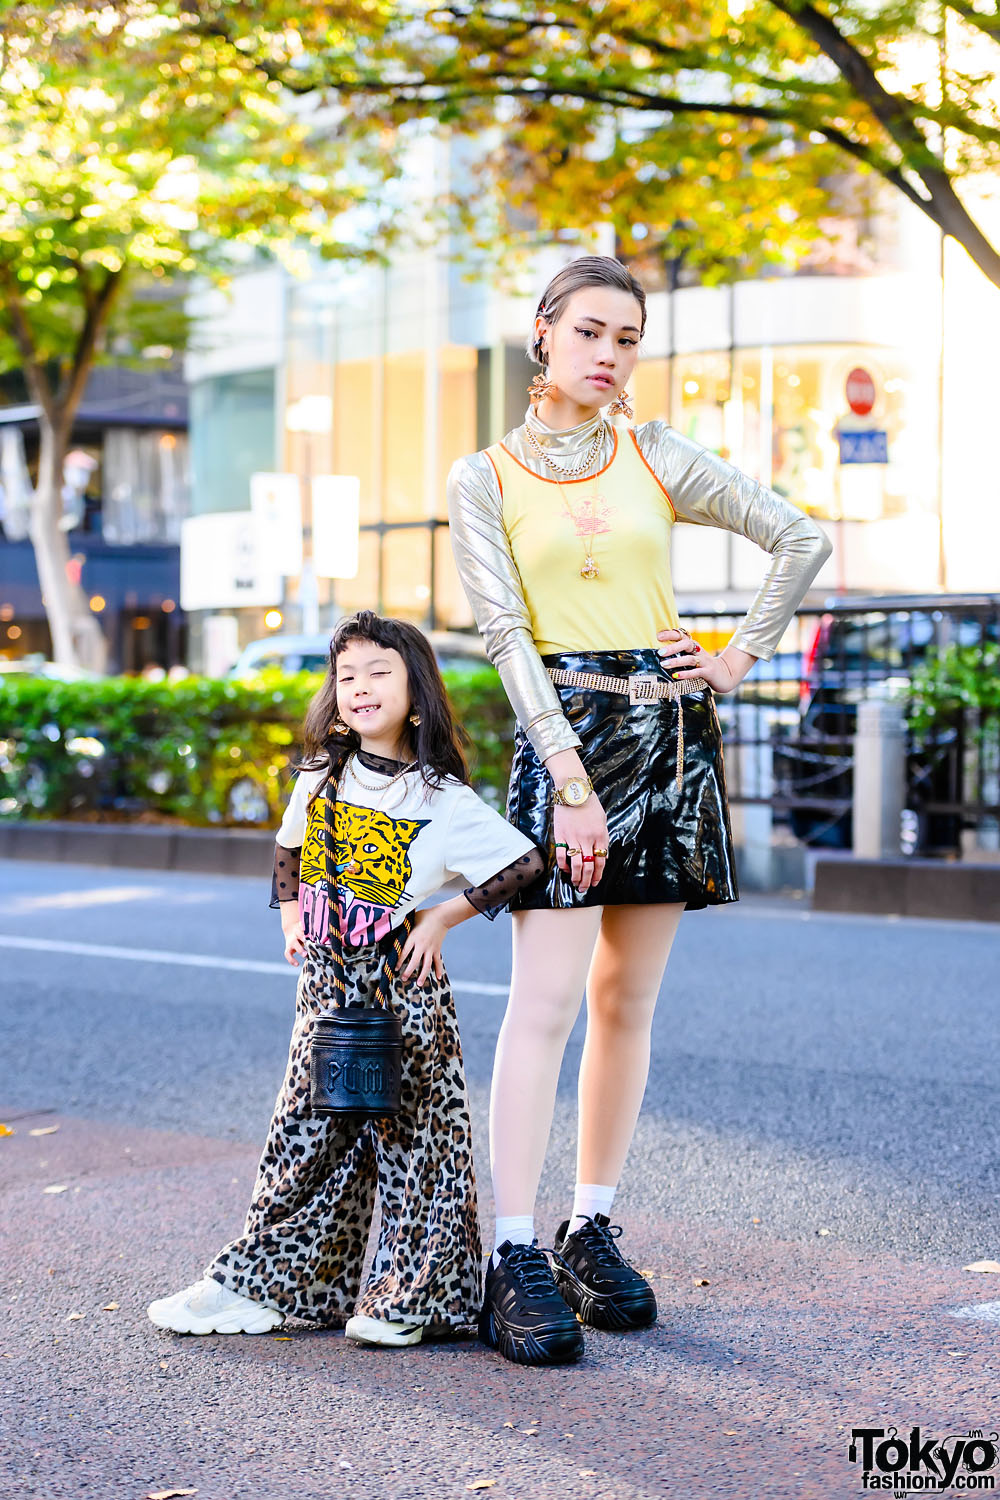 Harajuku Mother & Daughter Street Style w/ The Ivy Tokyo Earrings, Vivienne Westwood, Gucci Tiger Shirt, NLF Top, Puma x Fenty Bucket Bag & FILA Sneakers